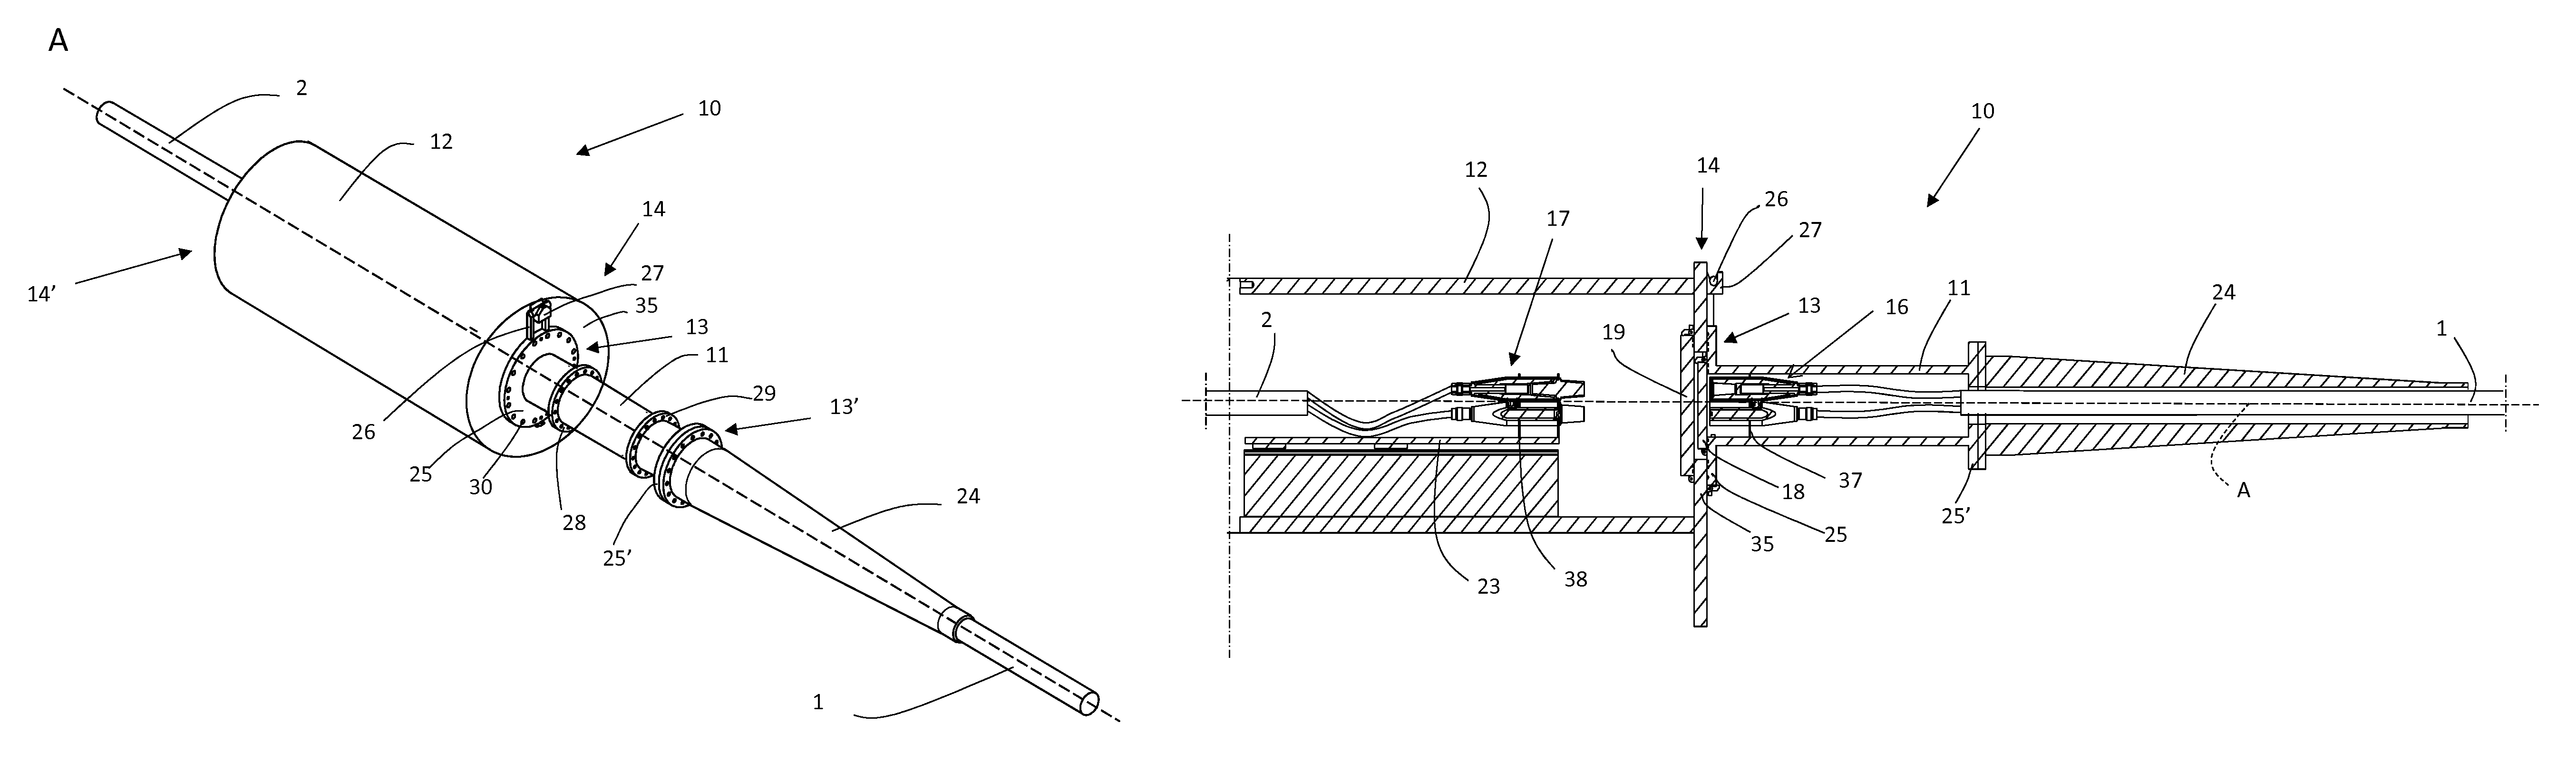 Automated tightener for a wet mateable connection assembly